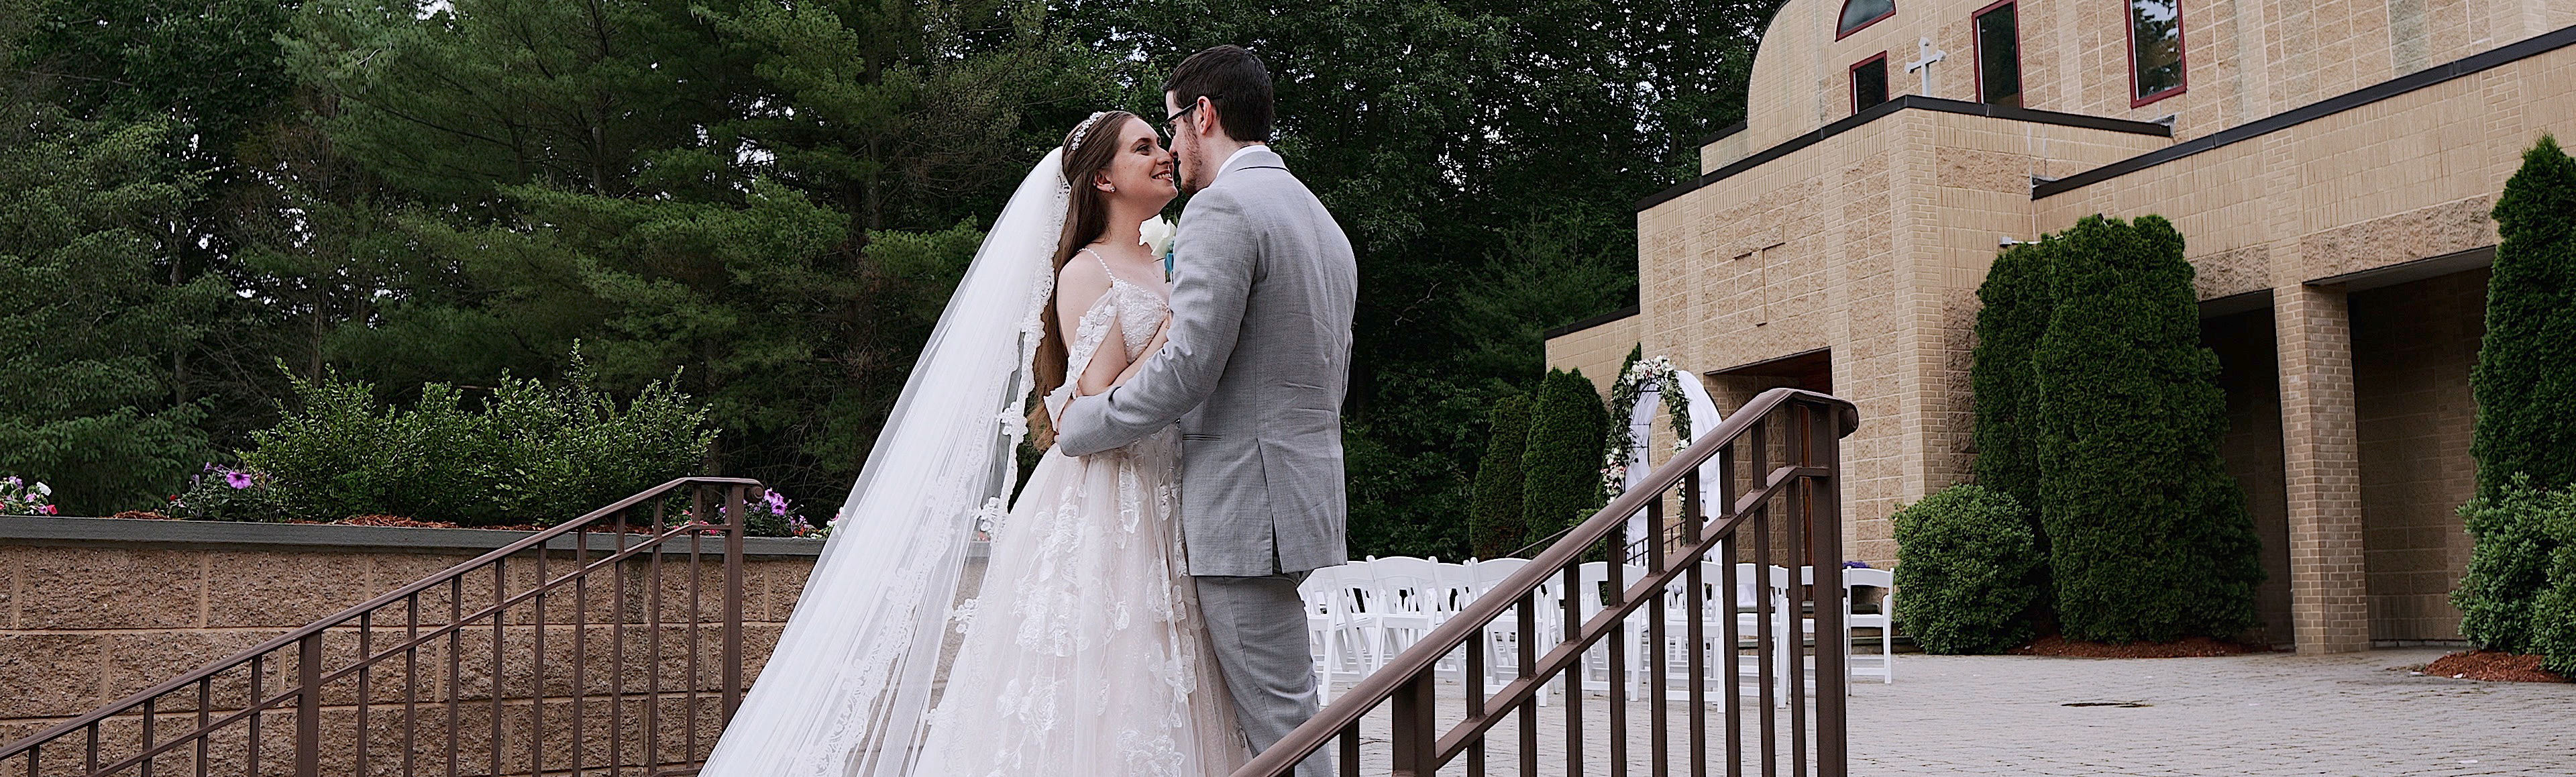 Couple standing on stairs facing each other. You can see a church with an arbor behind the. Groom is wearing a light grey suit and the bride is wearing an almond colored wedding dress with off-the-shoulder straps and has a cathedral length veil.